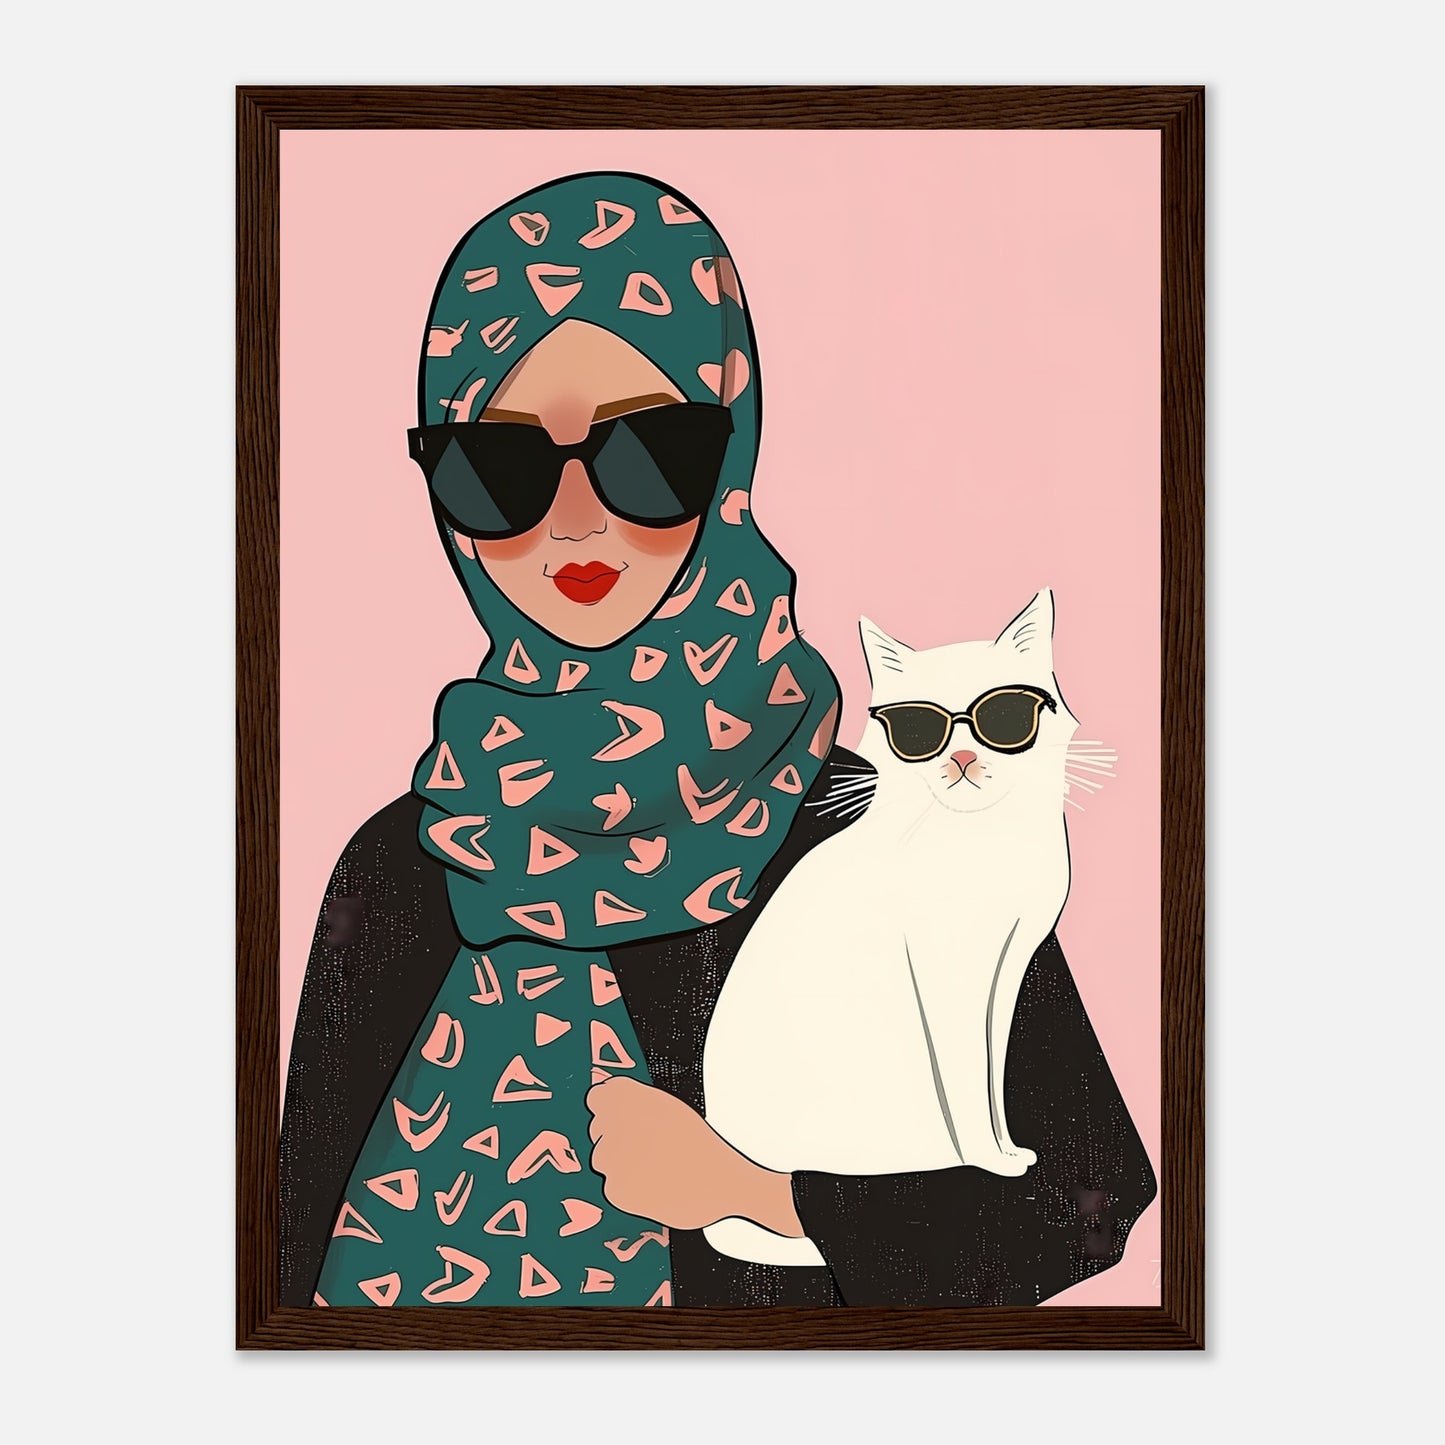 Illustration of a stylish woman with a hijab holding a cat wearing sunglasses.